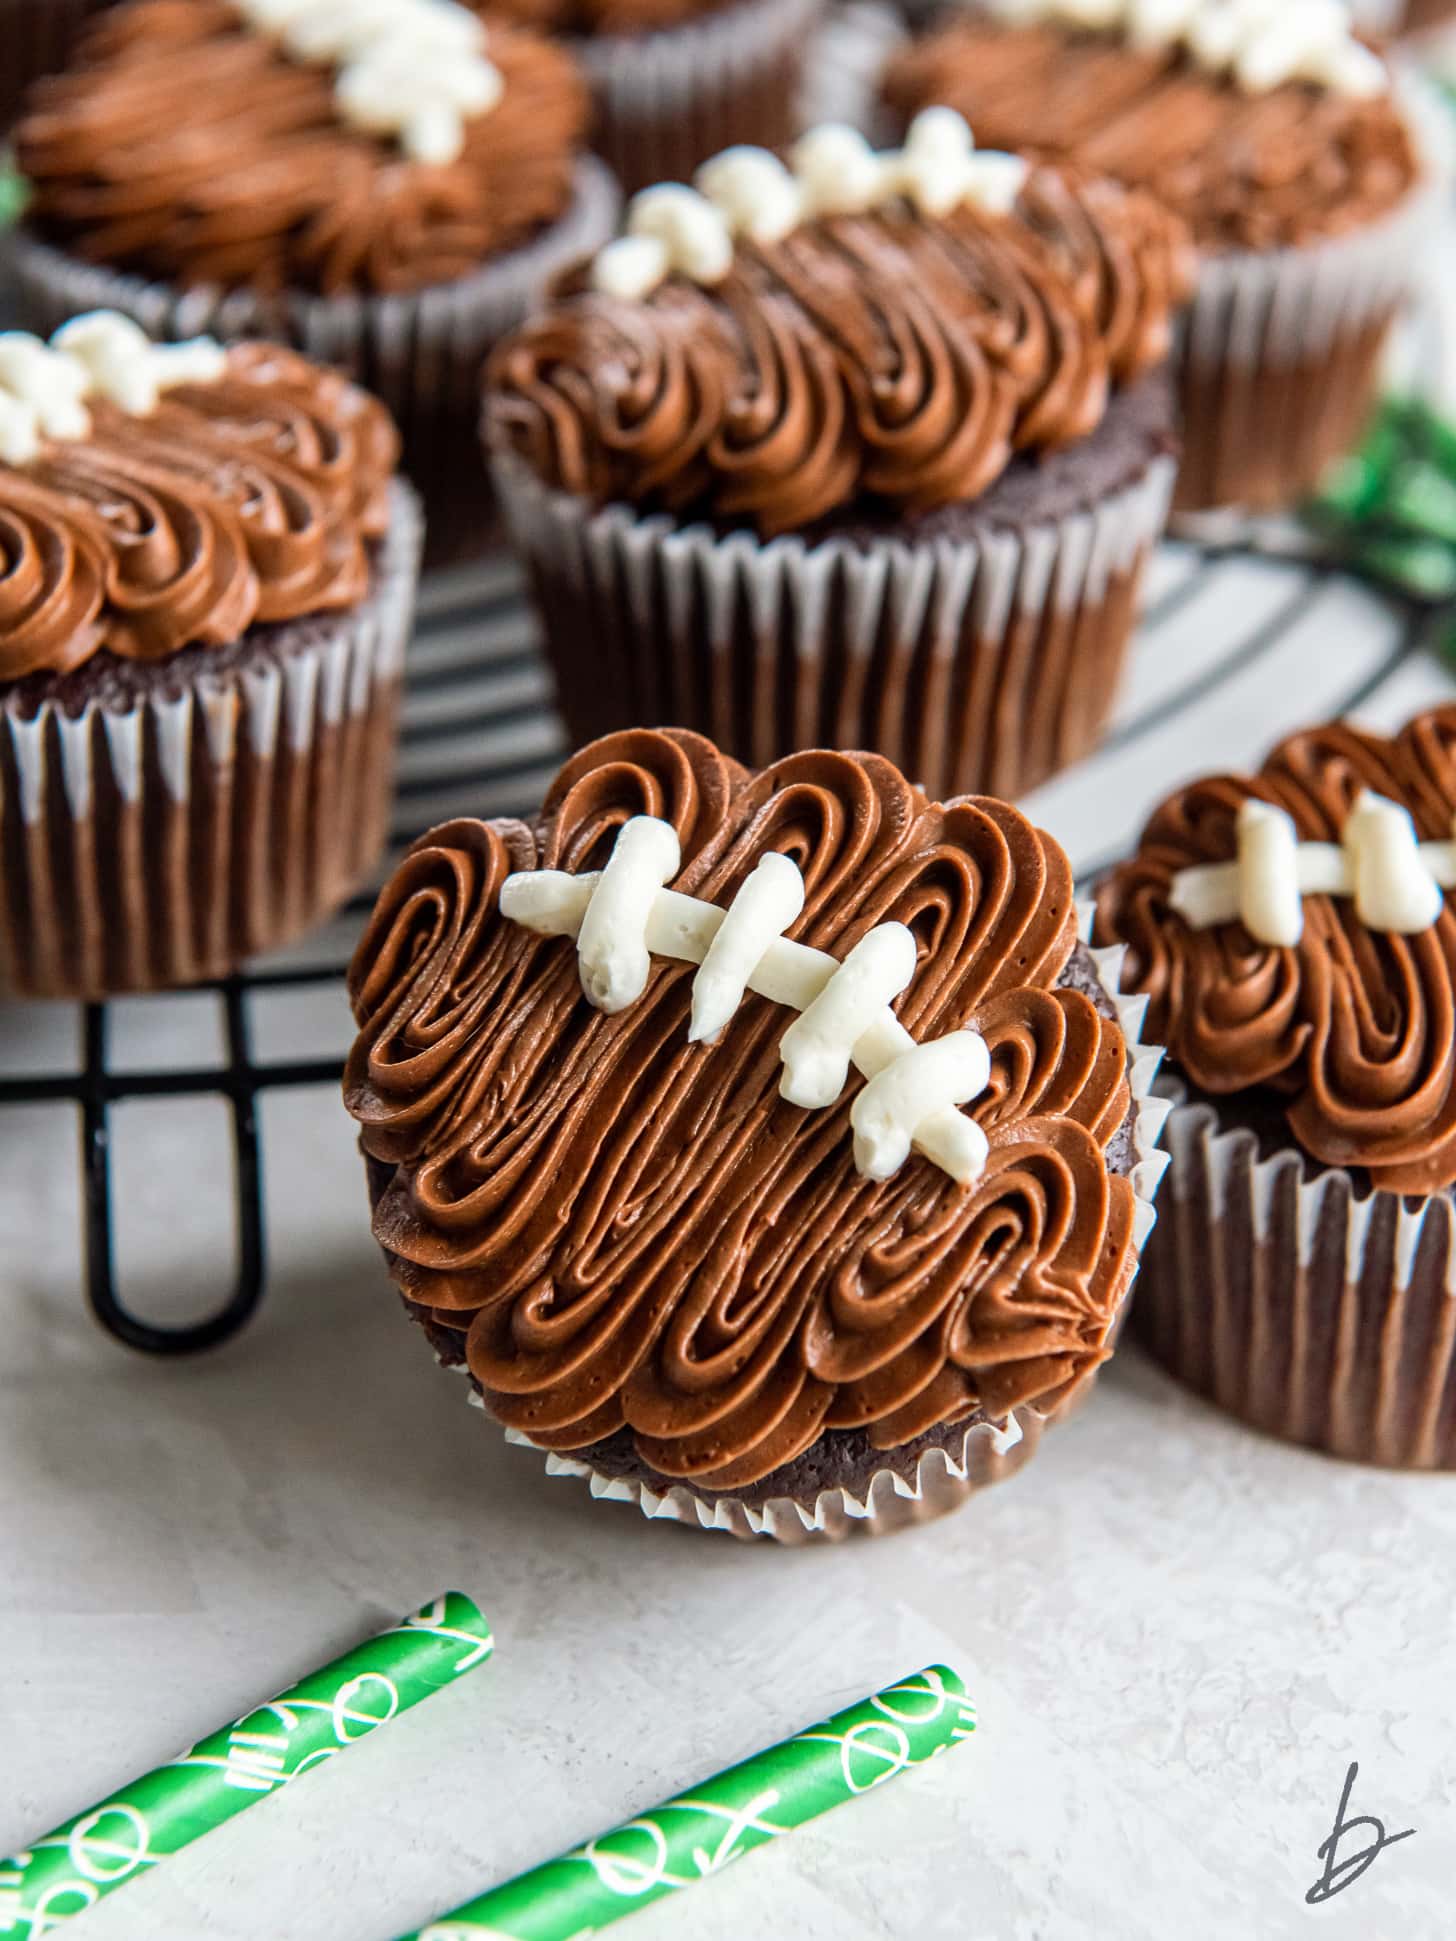 football cupcake topped with chocolate frosting and vanilla frosting stitched laces.